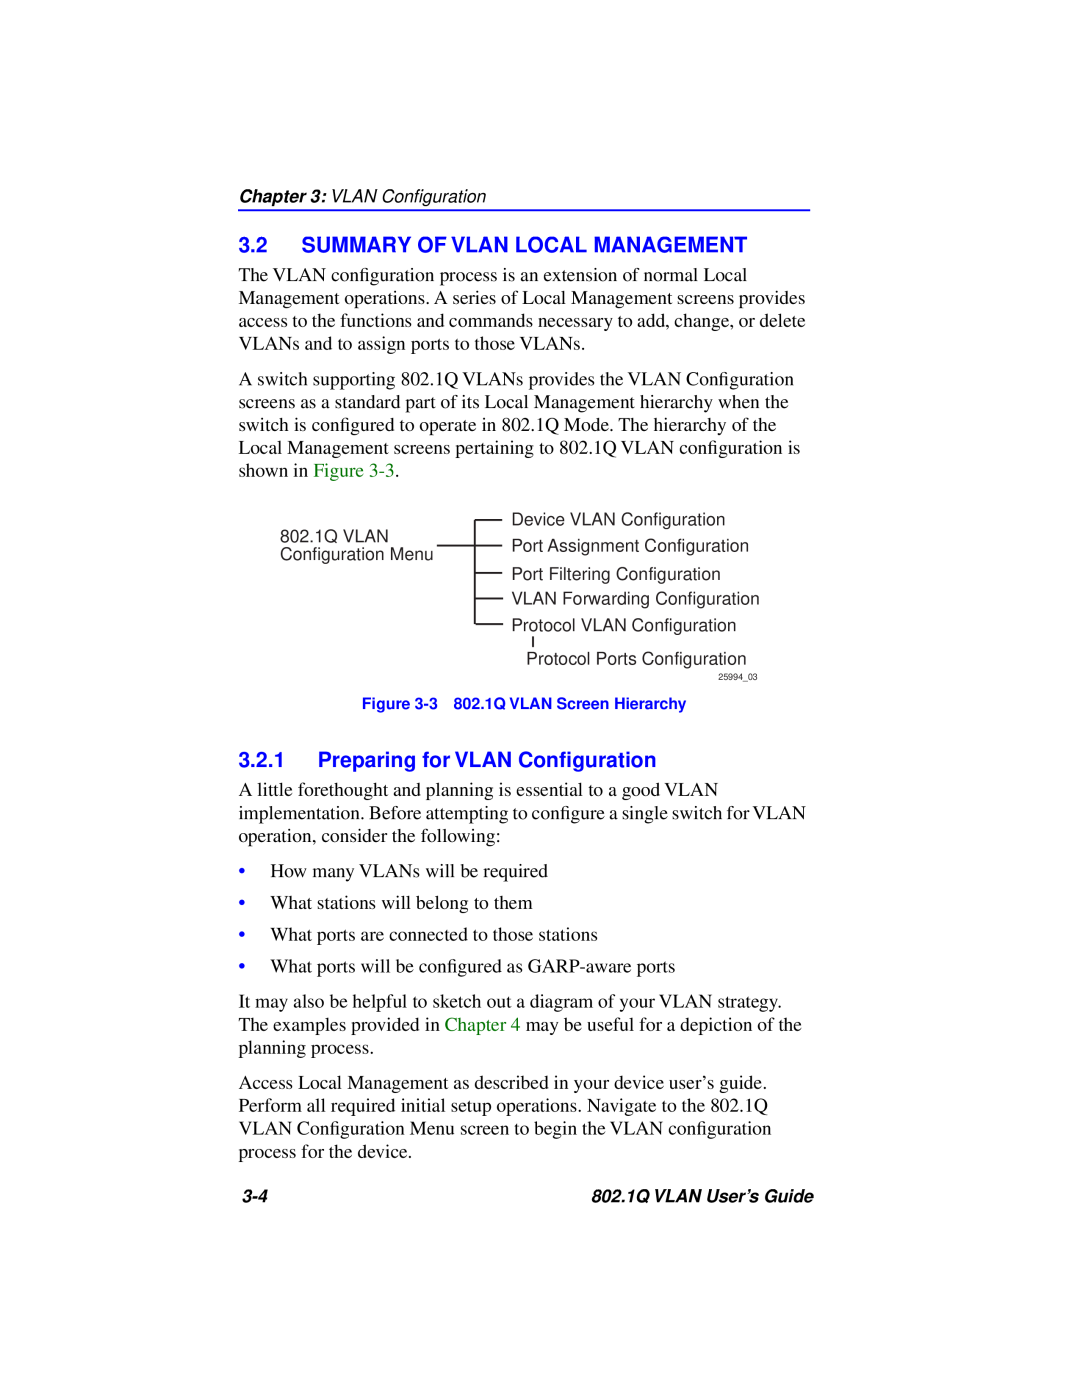 Cabletron Systems 802.1Q manual Summary Of Vlan Local Management, Preparing for VLAN Conﬁguration 